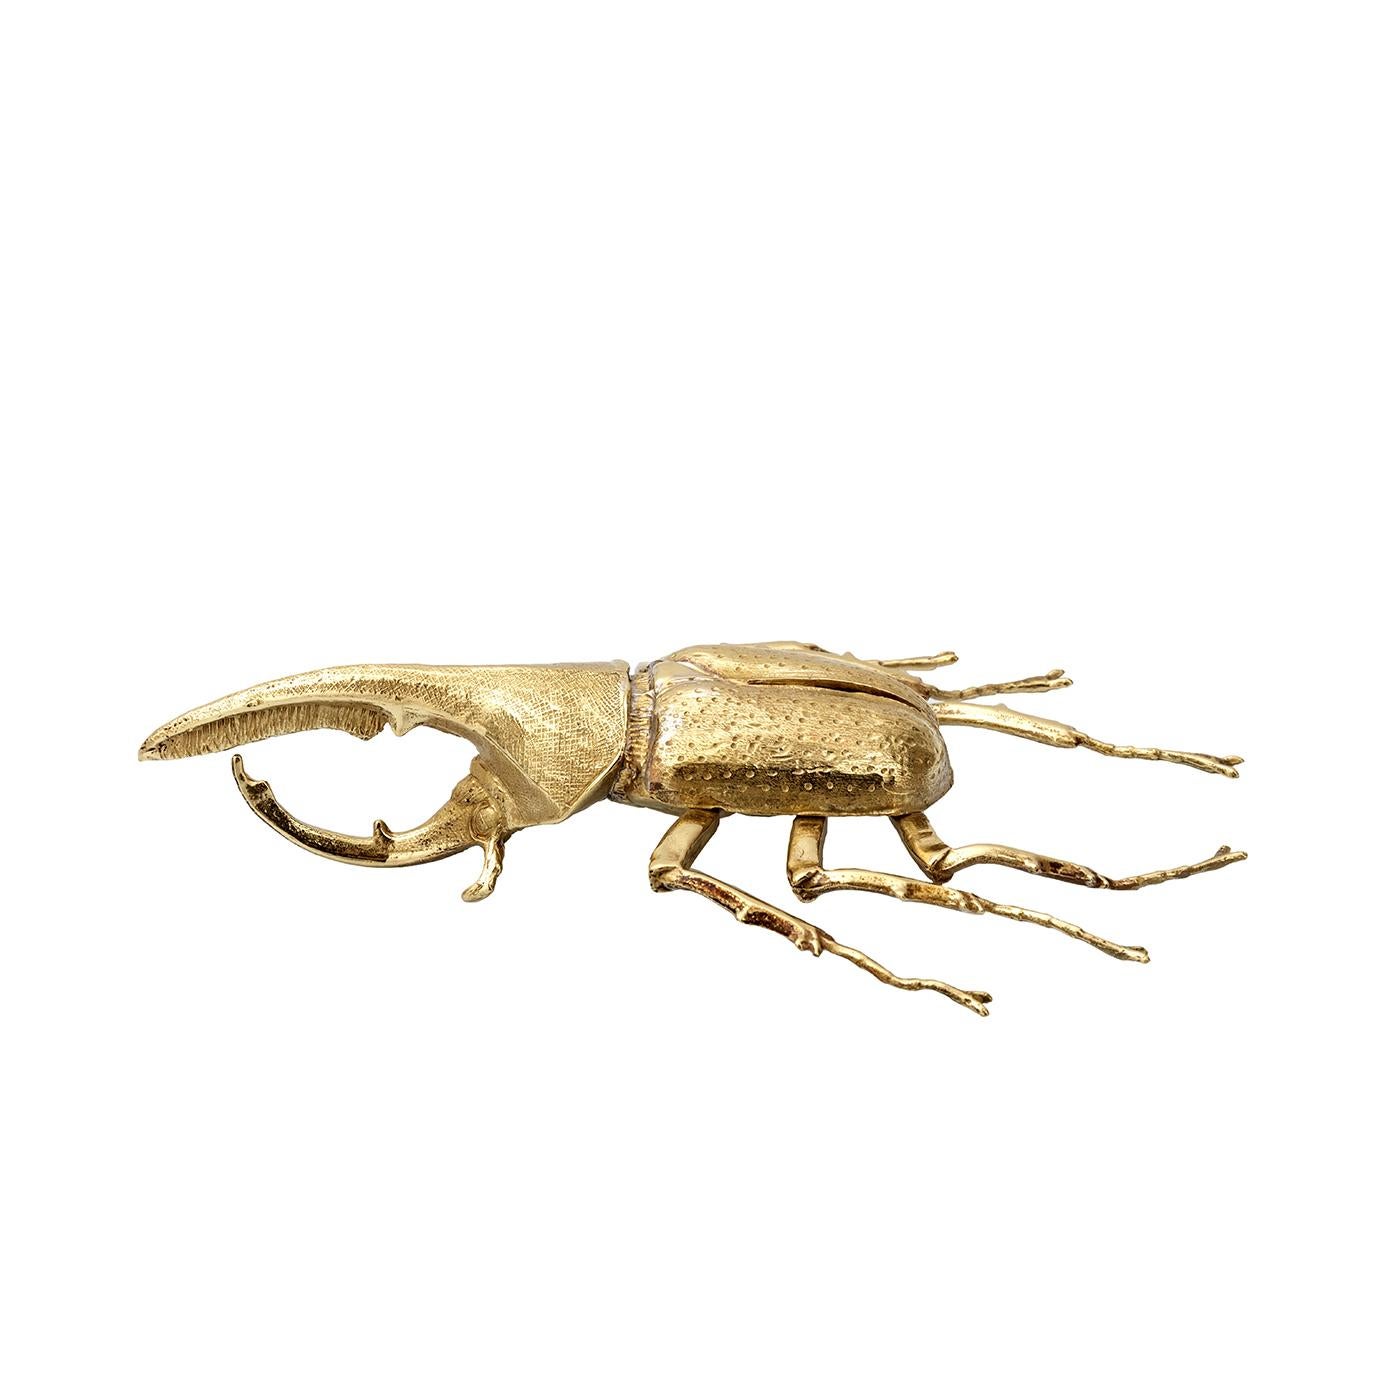 Chiseled entirely by hand from bronze, the Rhinoceros Beetle Paperweight is one part quirky and one part timeless craftsmanship. Perfect for a traditional office, the piece ensures both order and amusement at the same time. The piece can also be